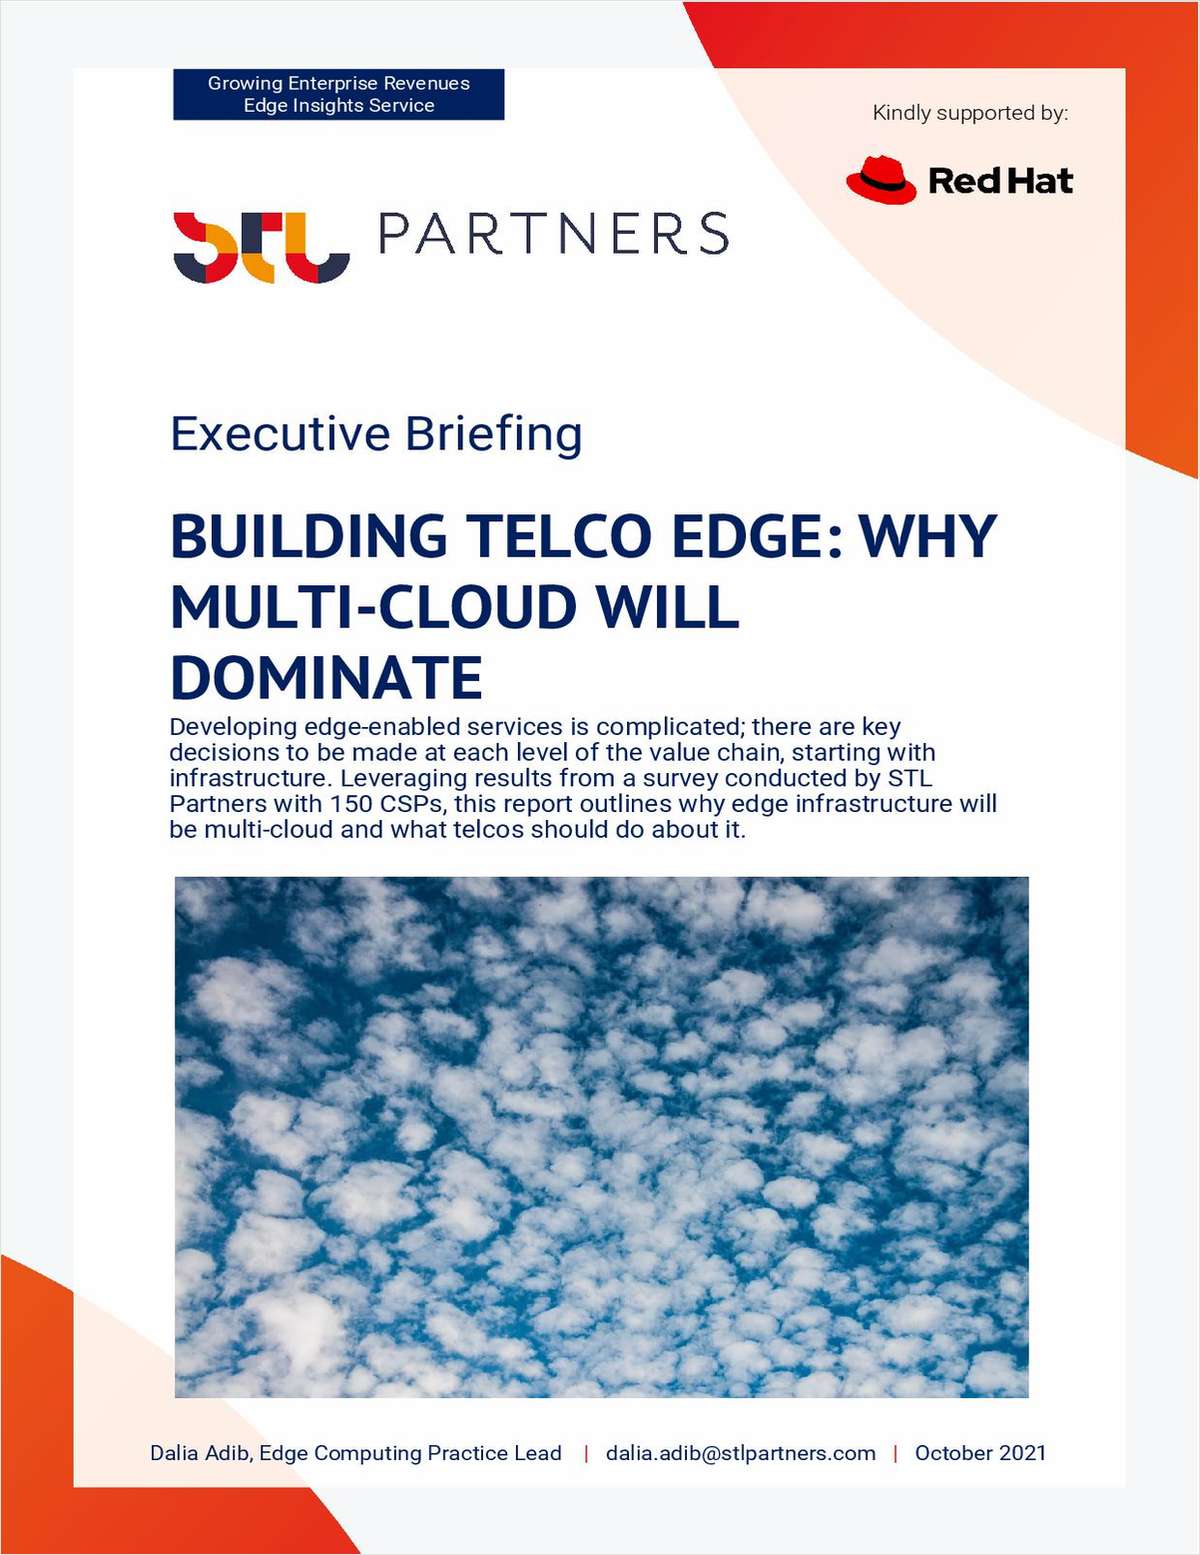 Building telco edge: Why multicloud will dominate